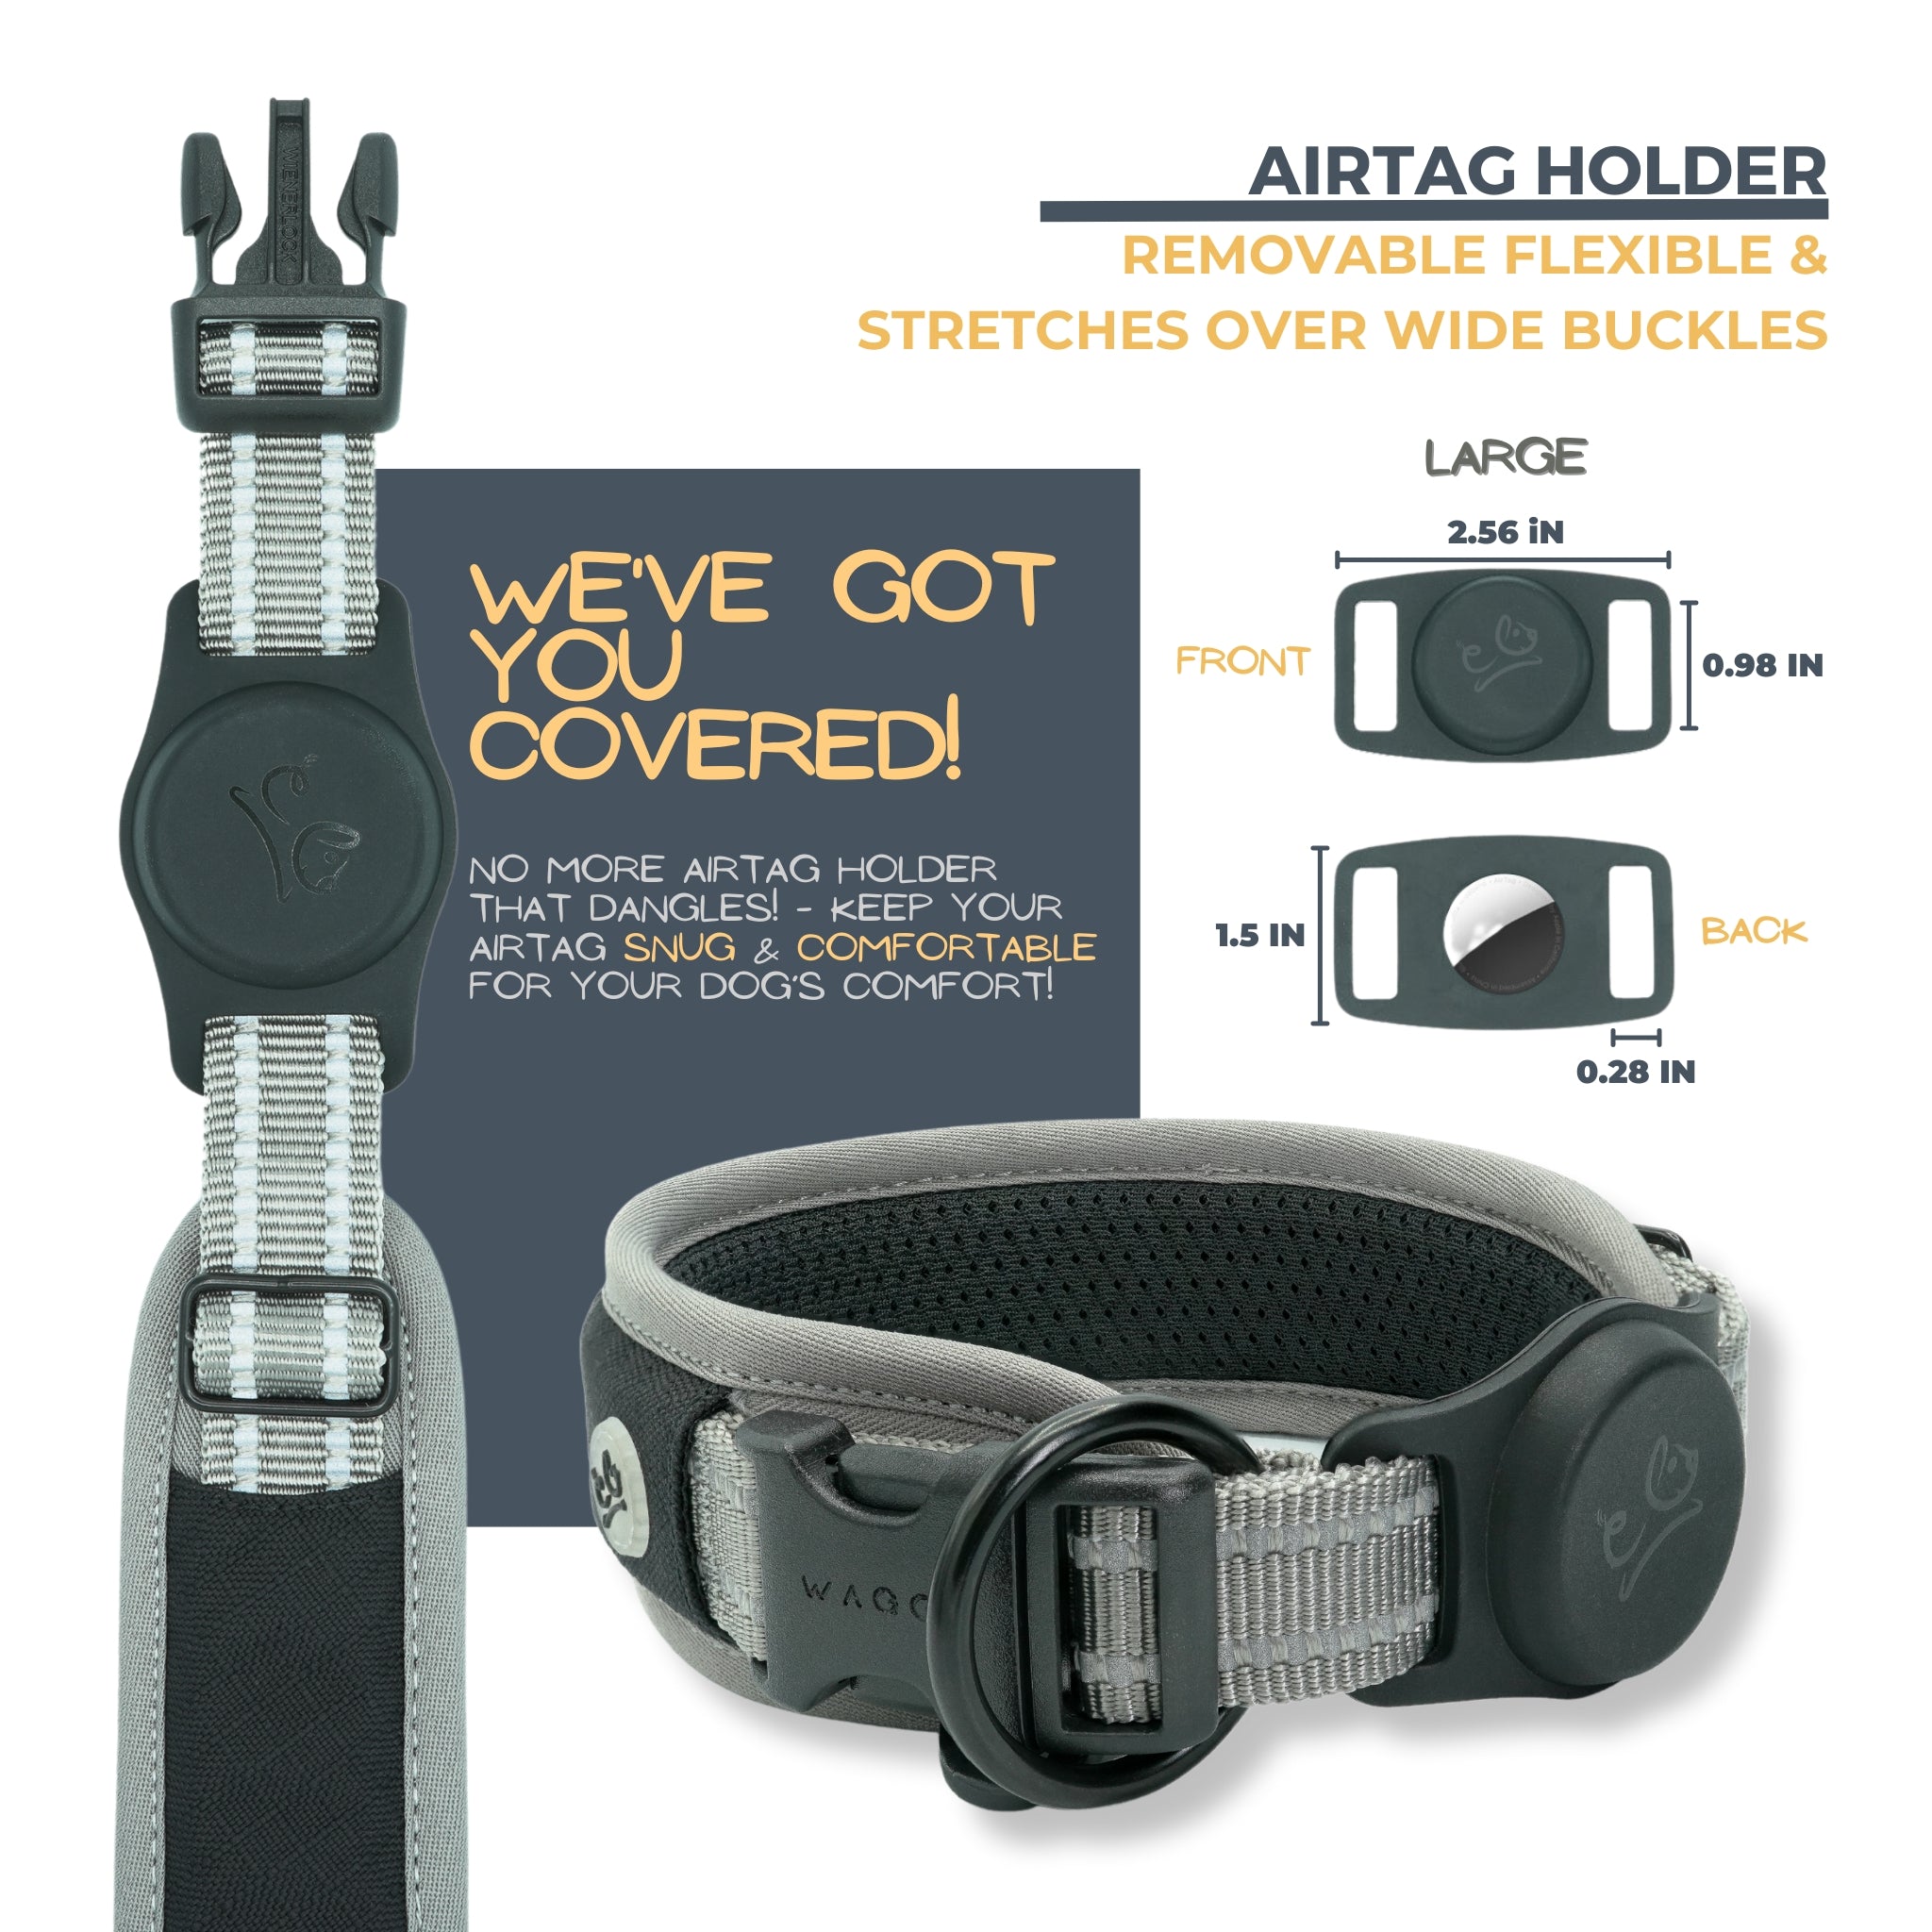 Grey Air Mesh dog collar Airtag holder details. Removable; flexible; stretches over wide buckles. Airtag Holder exact measurements and shows a black collar with Airtag holder. No more Airtag holder that dangles. Airtag is to be snug &amp; comfortable for your dog&#39;s comfort.